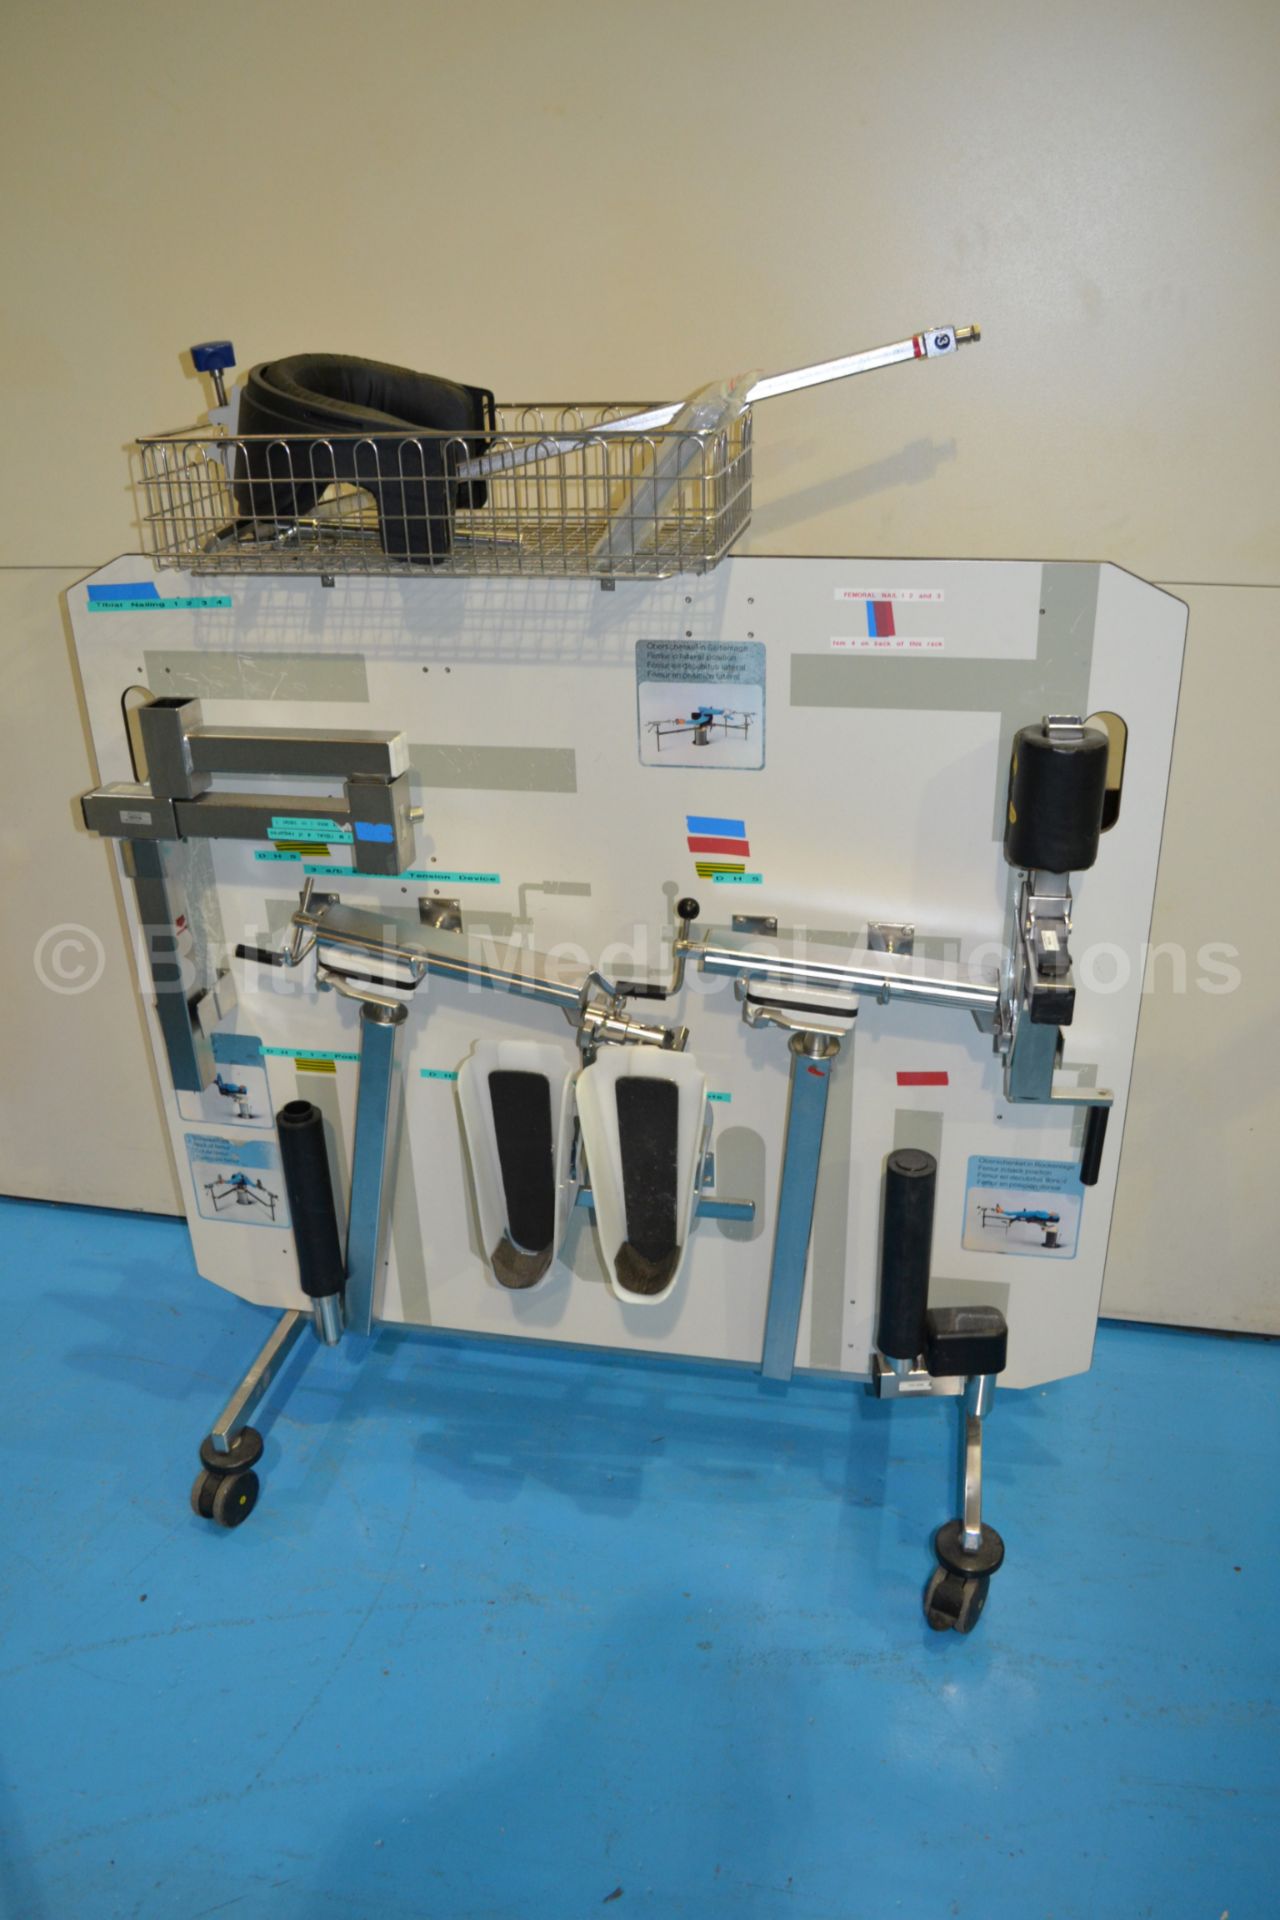 Operating Table Accessories Trolley with Accessori - Image 2 of 2